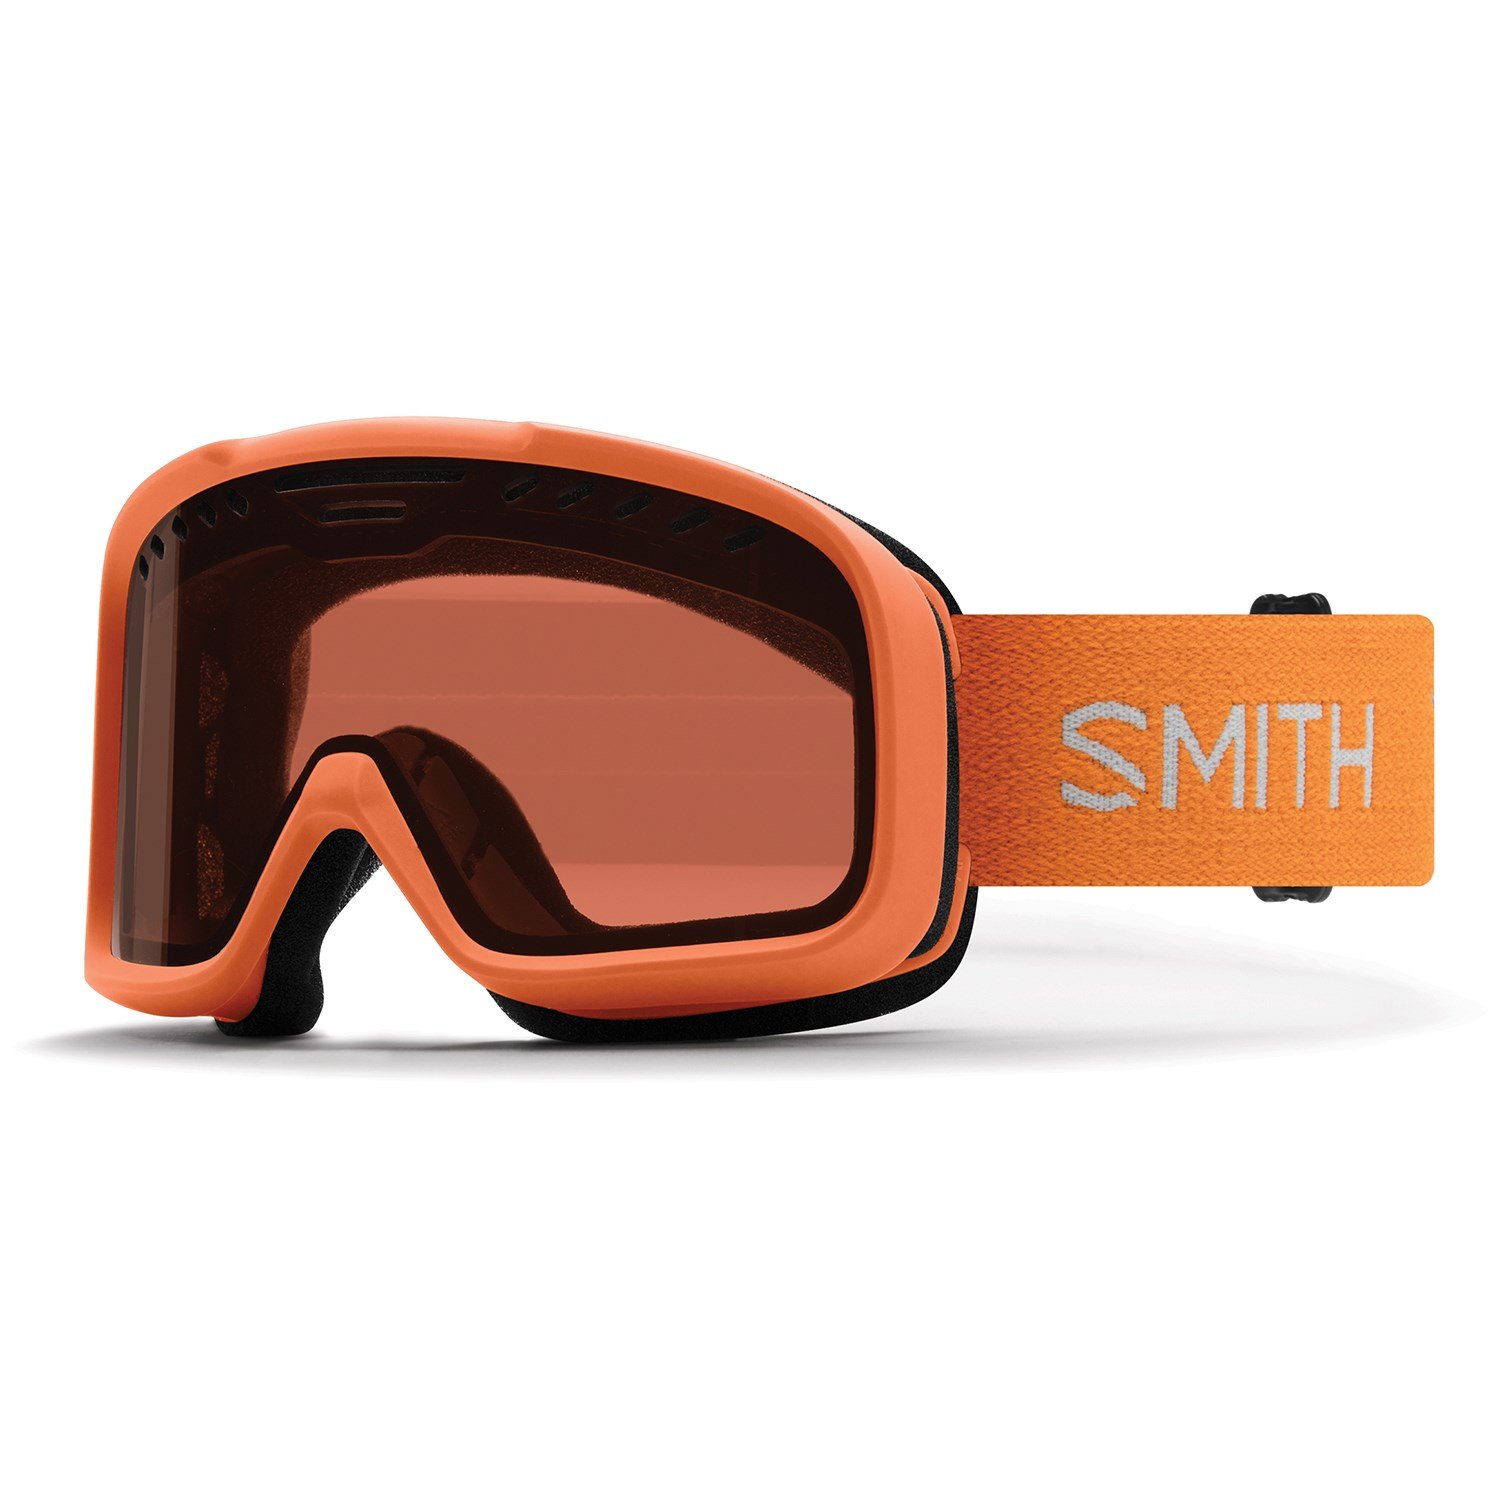 Ignitor Mirror Lens Fog-X inner lens New Smith Project Snow Goggles Red Frame 